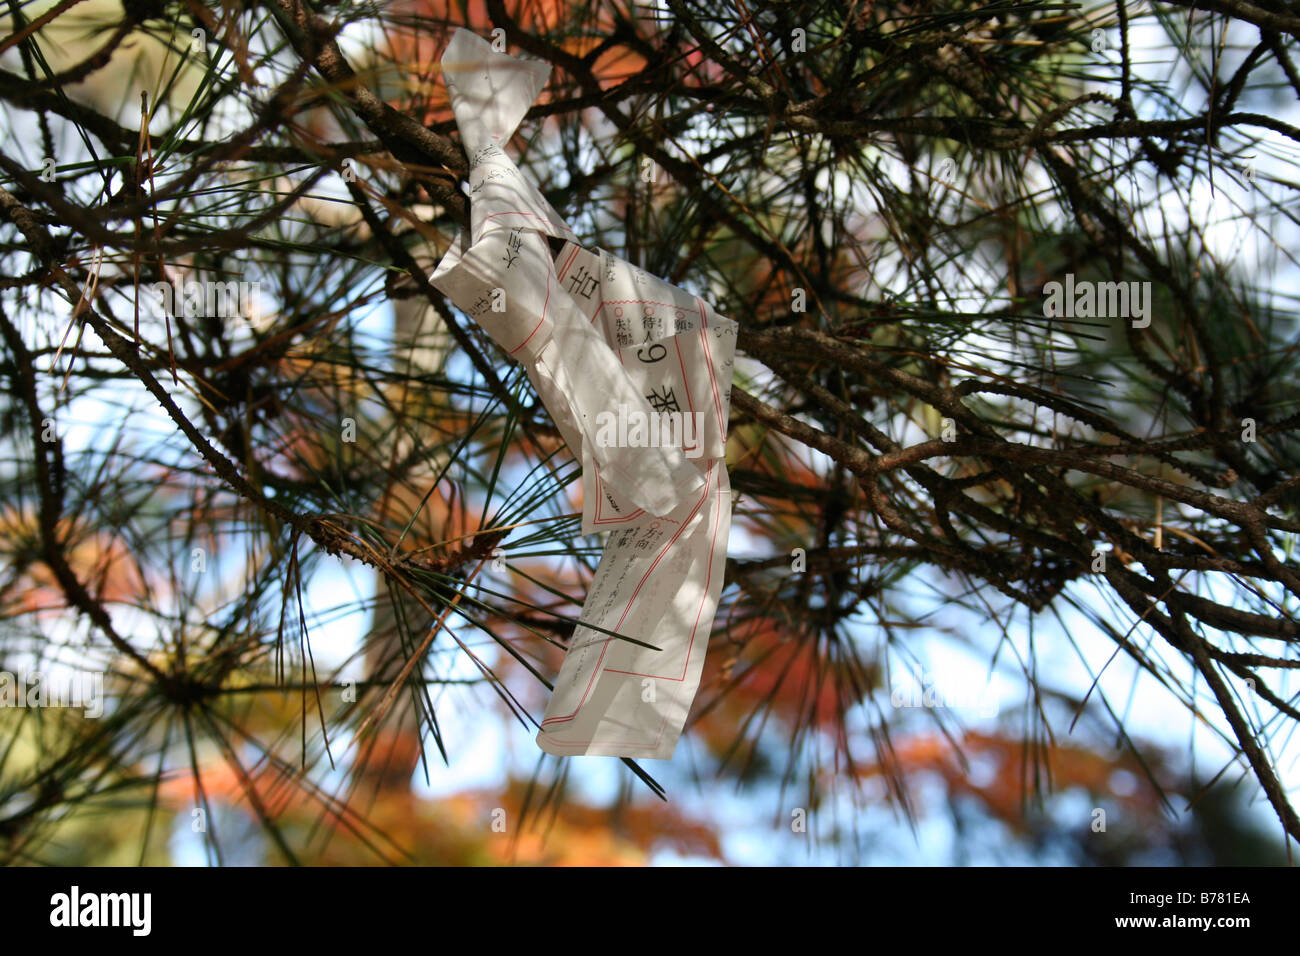 Two Omikuji fortunes tied to the branches of a pine tree at the Motsu-ji temple ruins, during Japan's autumn season. Stock Photo